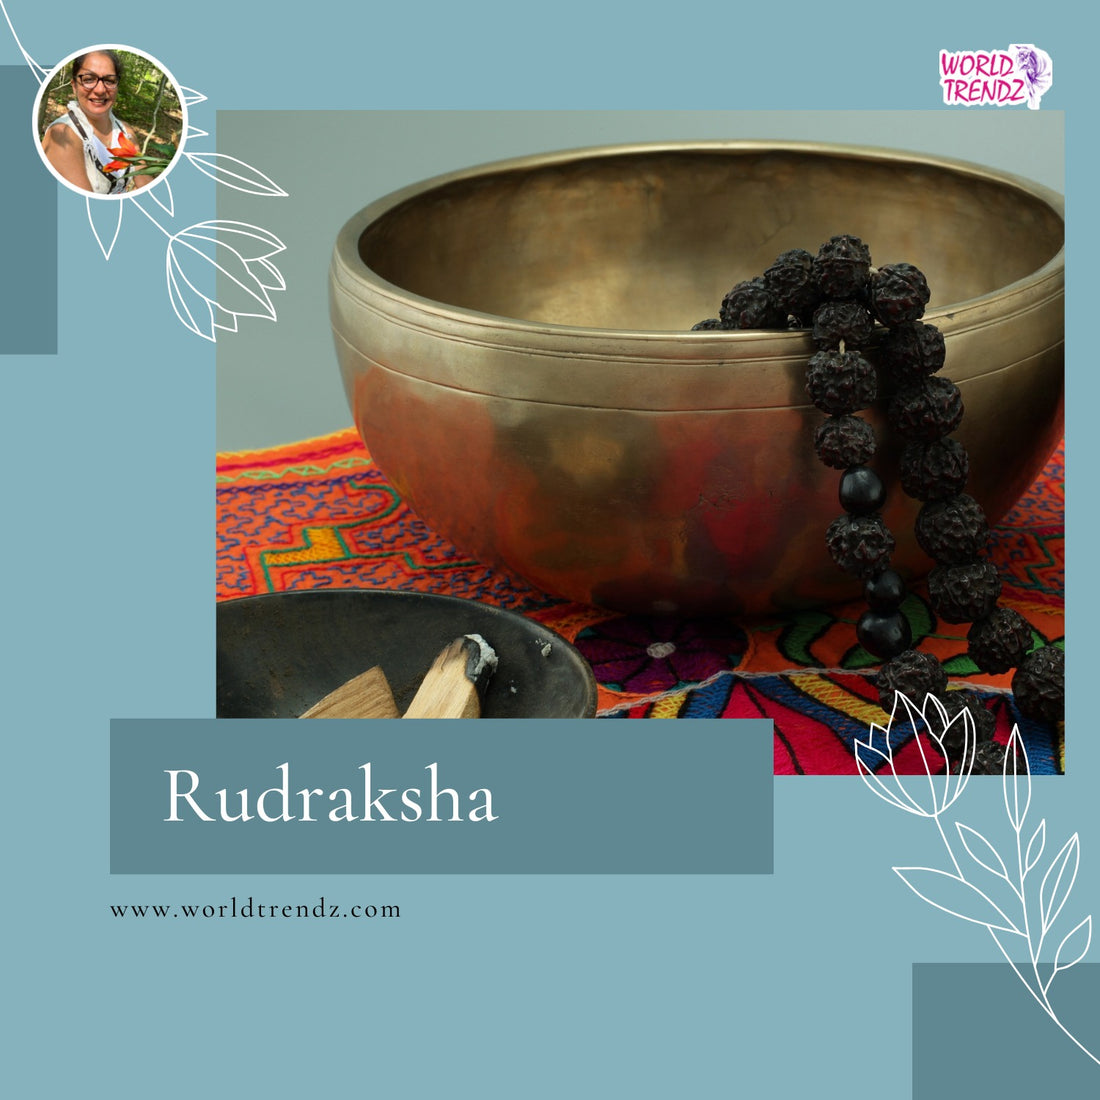 This Is Your Brain on Rudraksha